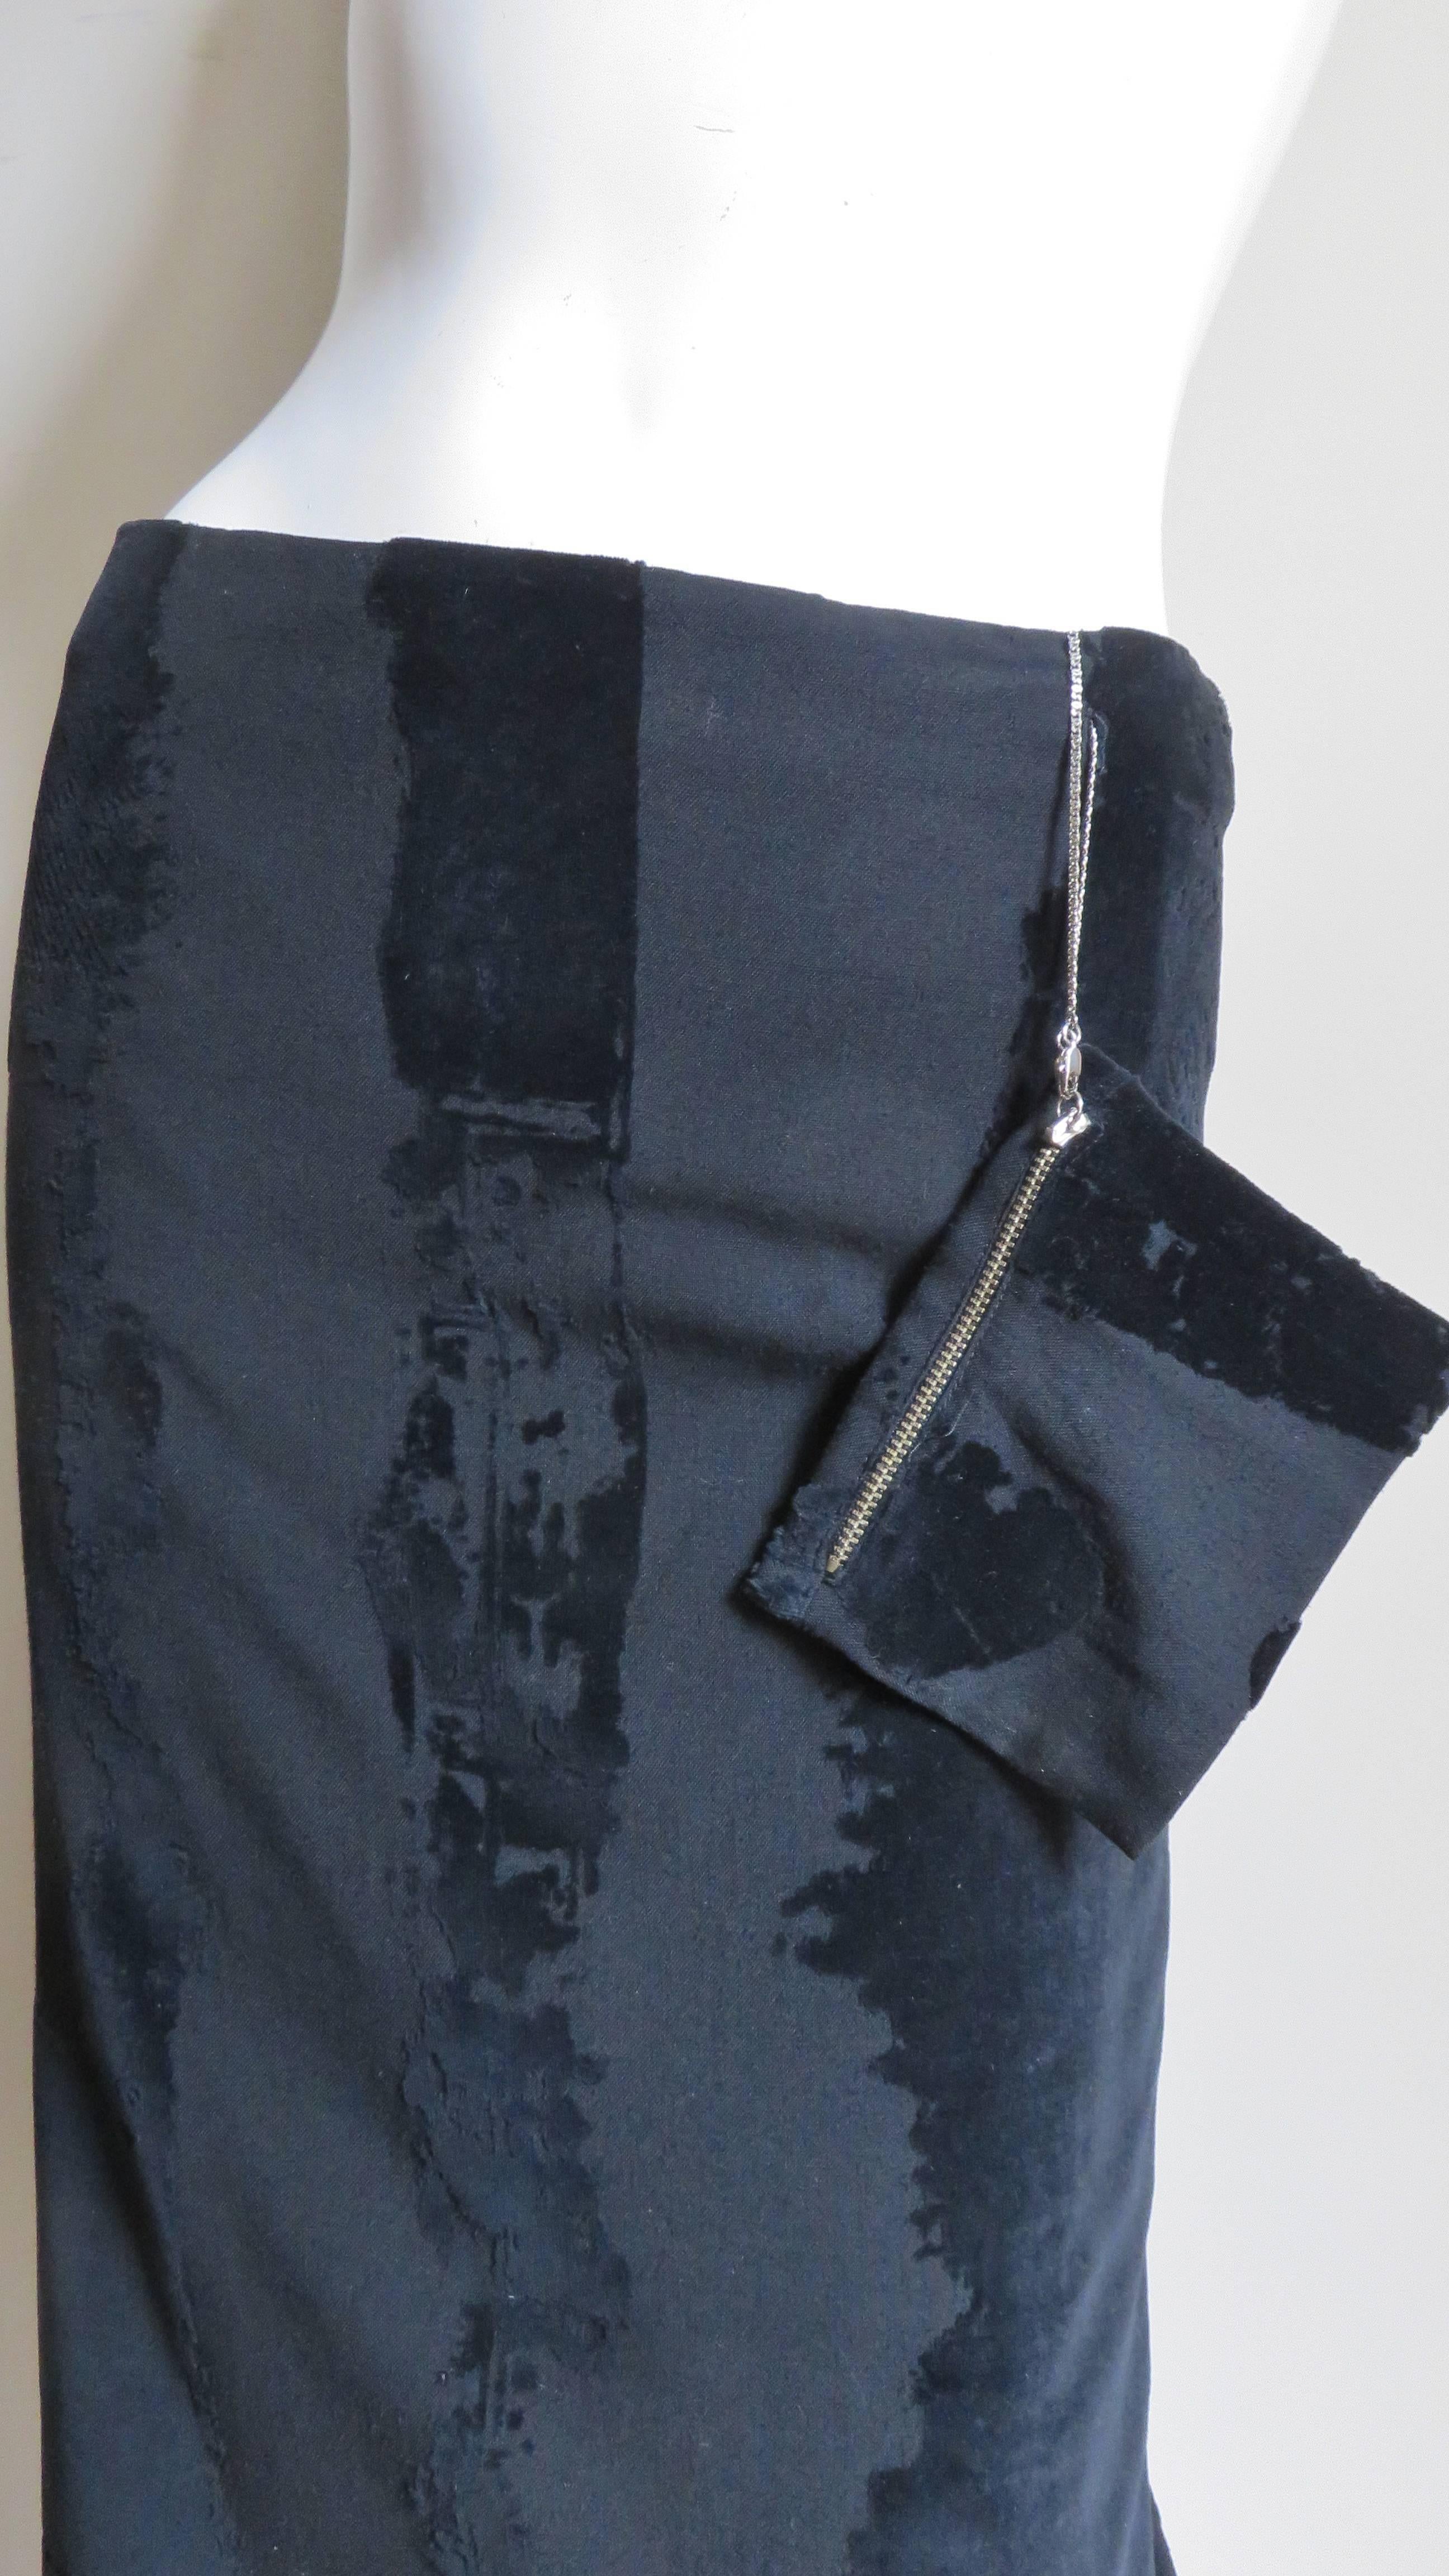 Jean Paul Gaultier Skirt with Zipper Pouch 1990s In Good Condition For Sale In Water Mill, NY